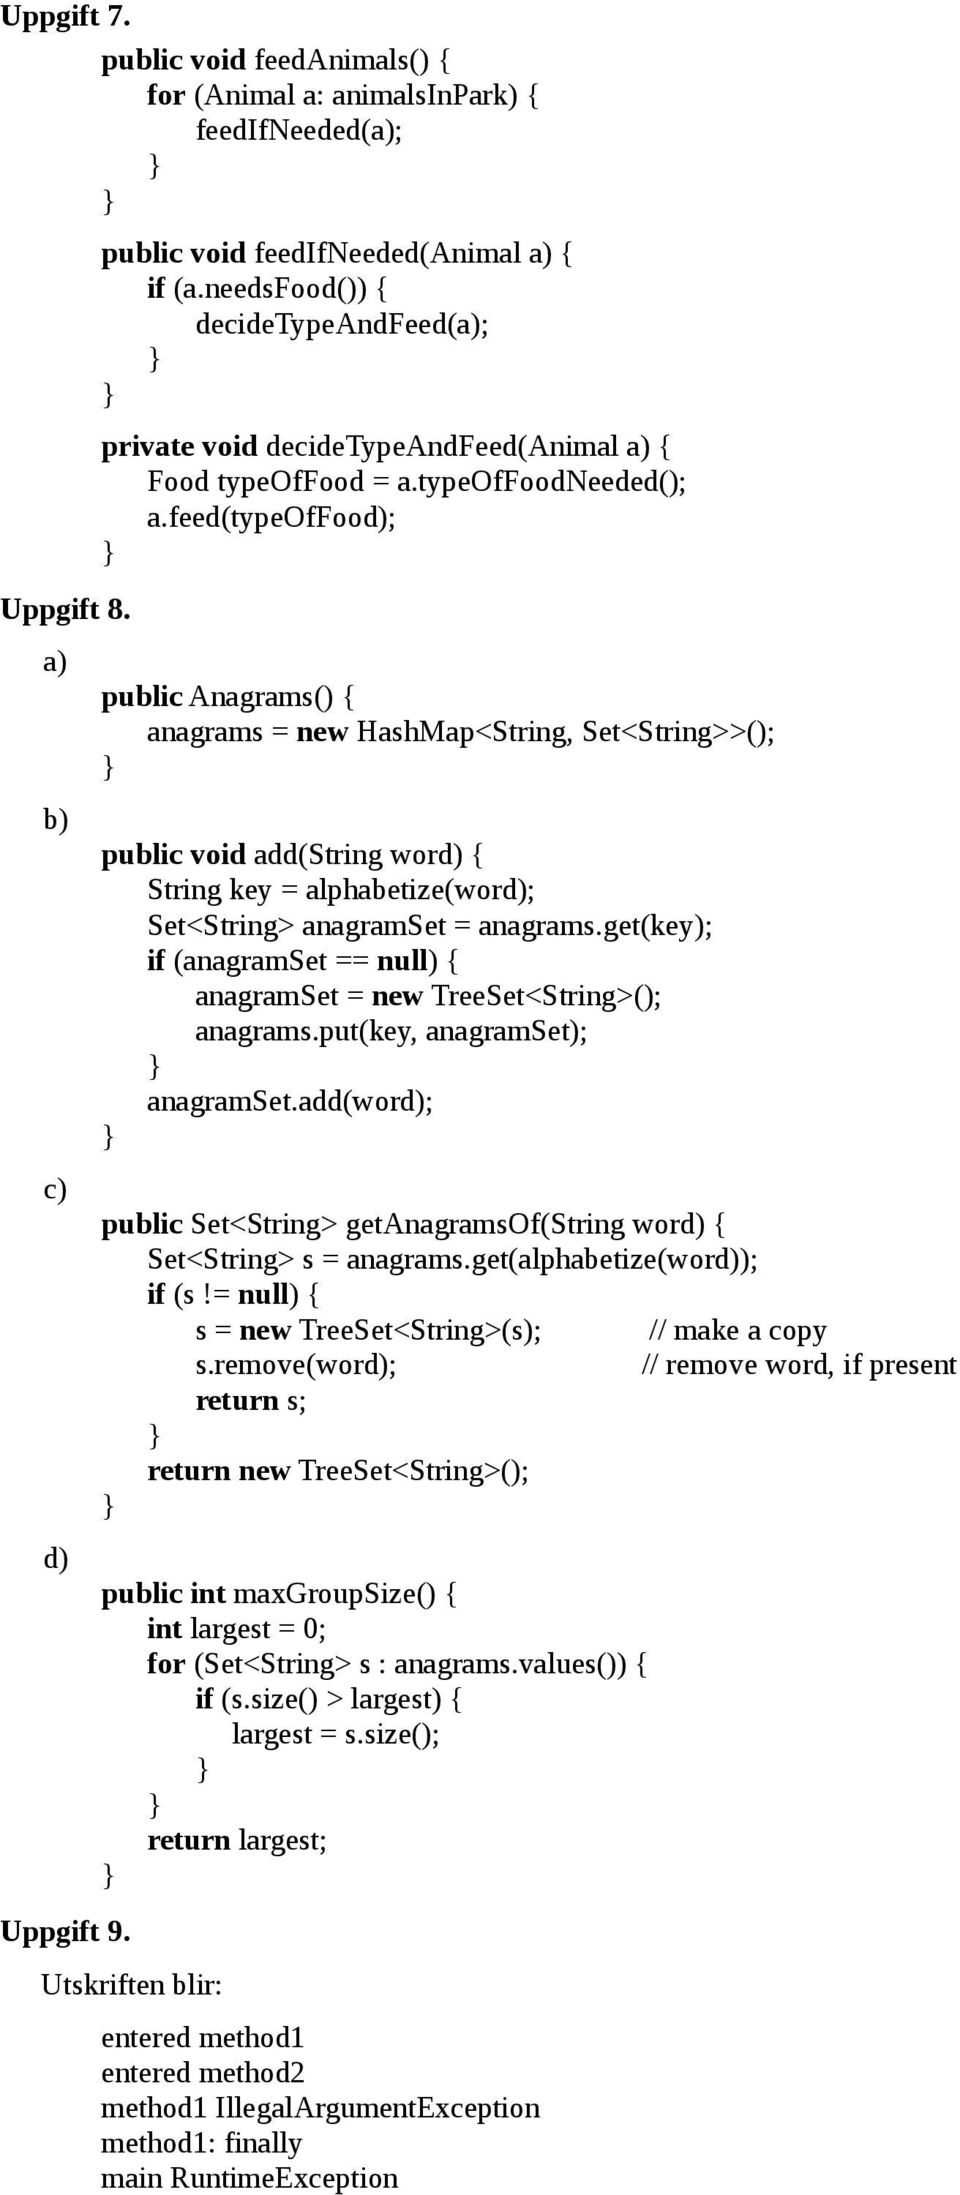 feed(typeoffood); public Anagrams() { anagrams = new HashMap<String, Set<String>>(); public void add(string word) { String key = alphabetize(word); Set<String> anagramset = anagrams.